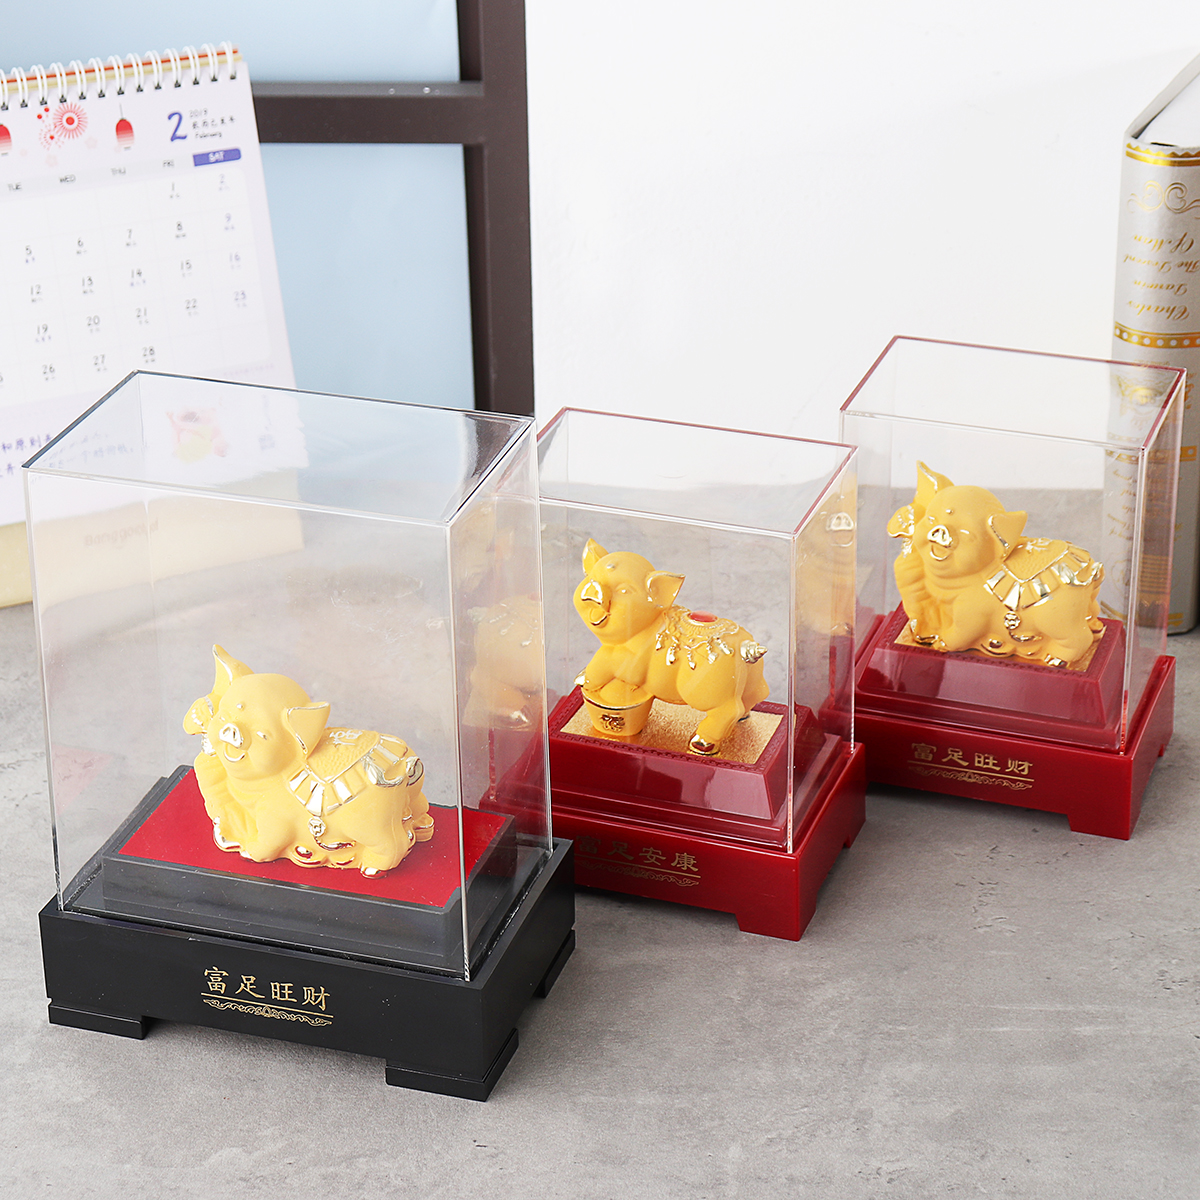 2019-Chinese-Zodiac-Gold-Pig-Money-Wealth-Statue-Office-Home-Decorations-Ornament-Gift-1515810-3